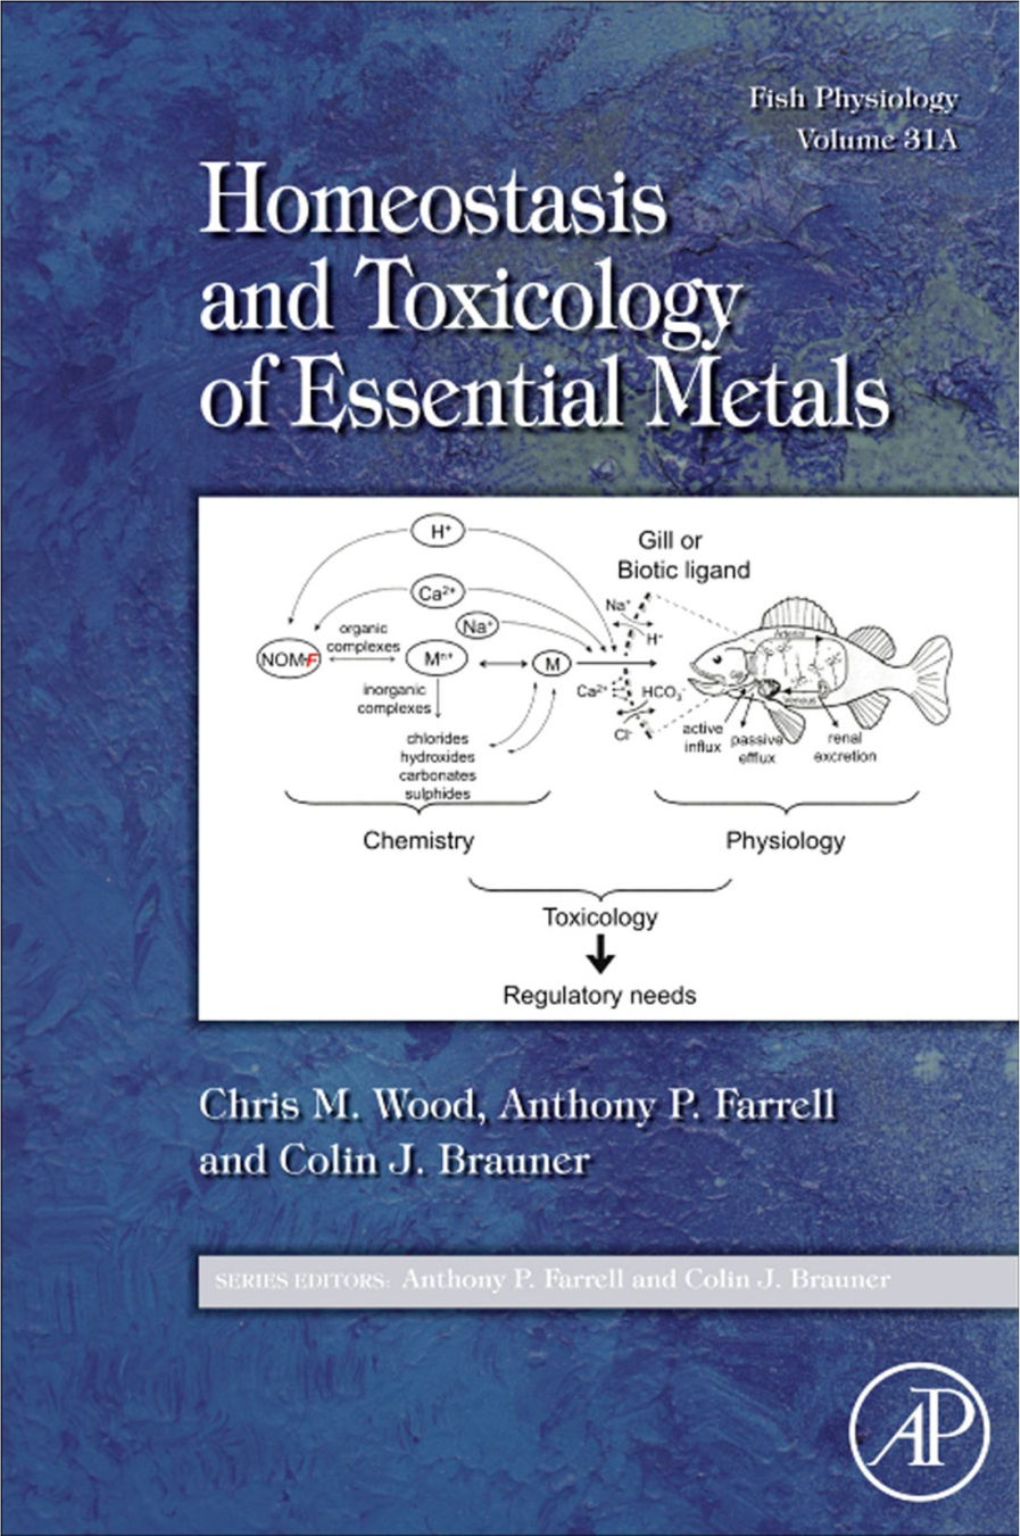 HOMEOSTASIS and TOXICOLOGY of ESSENTIAL METALS This Is Volume 31A in the FISH PHYSIOLOGY Series Edited by Chris M